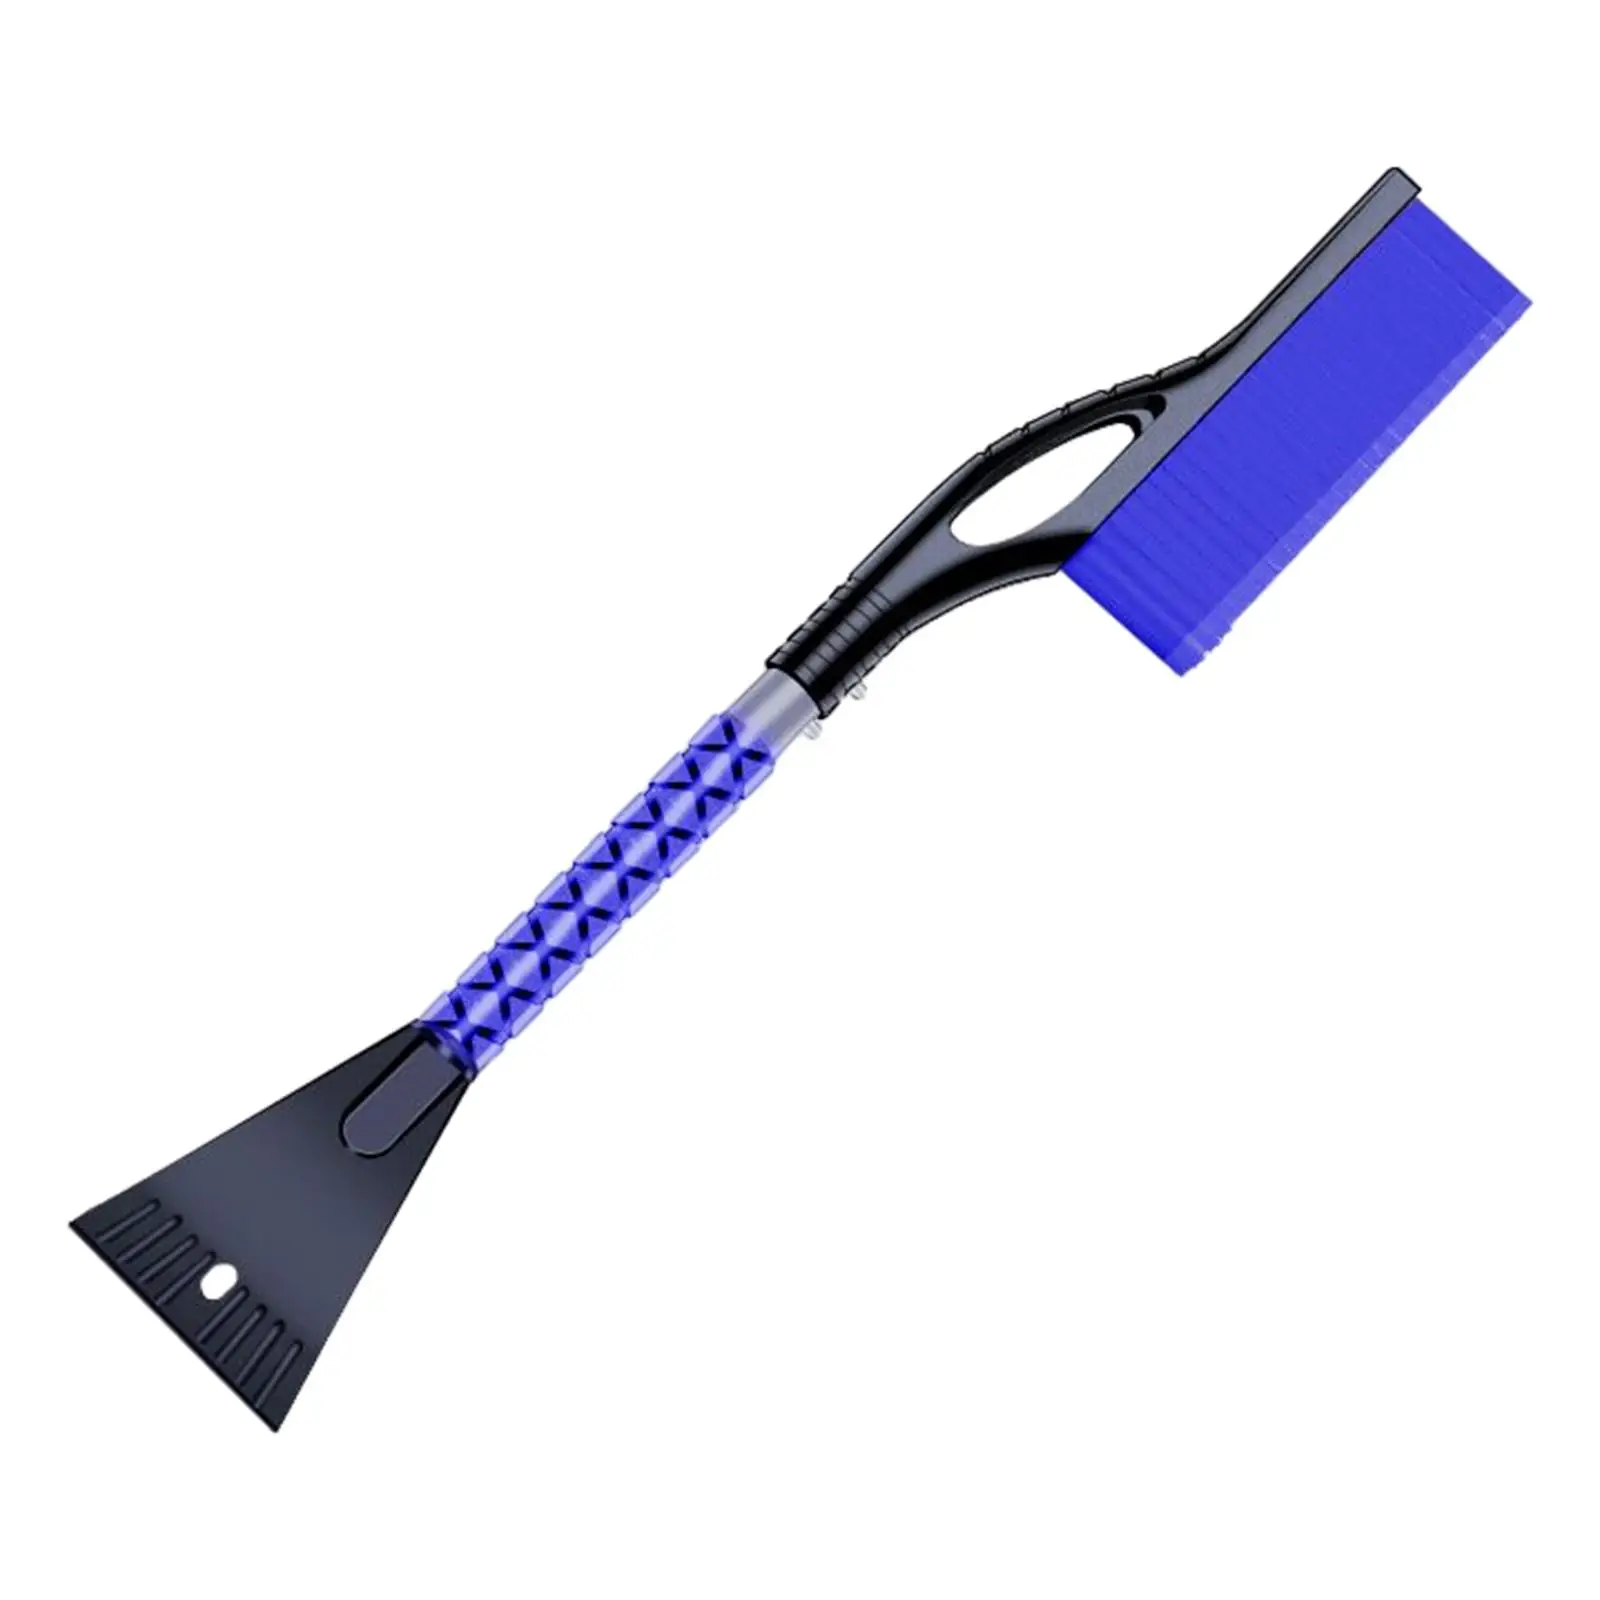 Snow Brush & Snow Shovel Portable with Grip Snowbrush Snow Remover Set for Car Windshield Auto SUV Camping Beach